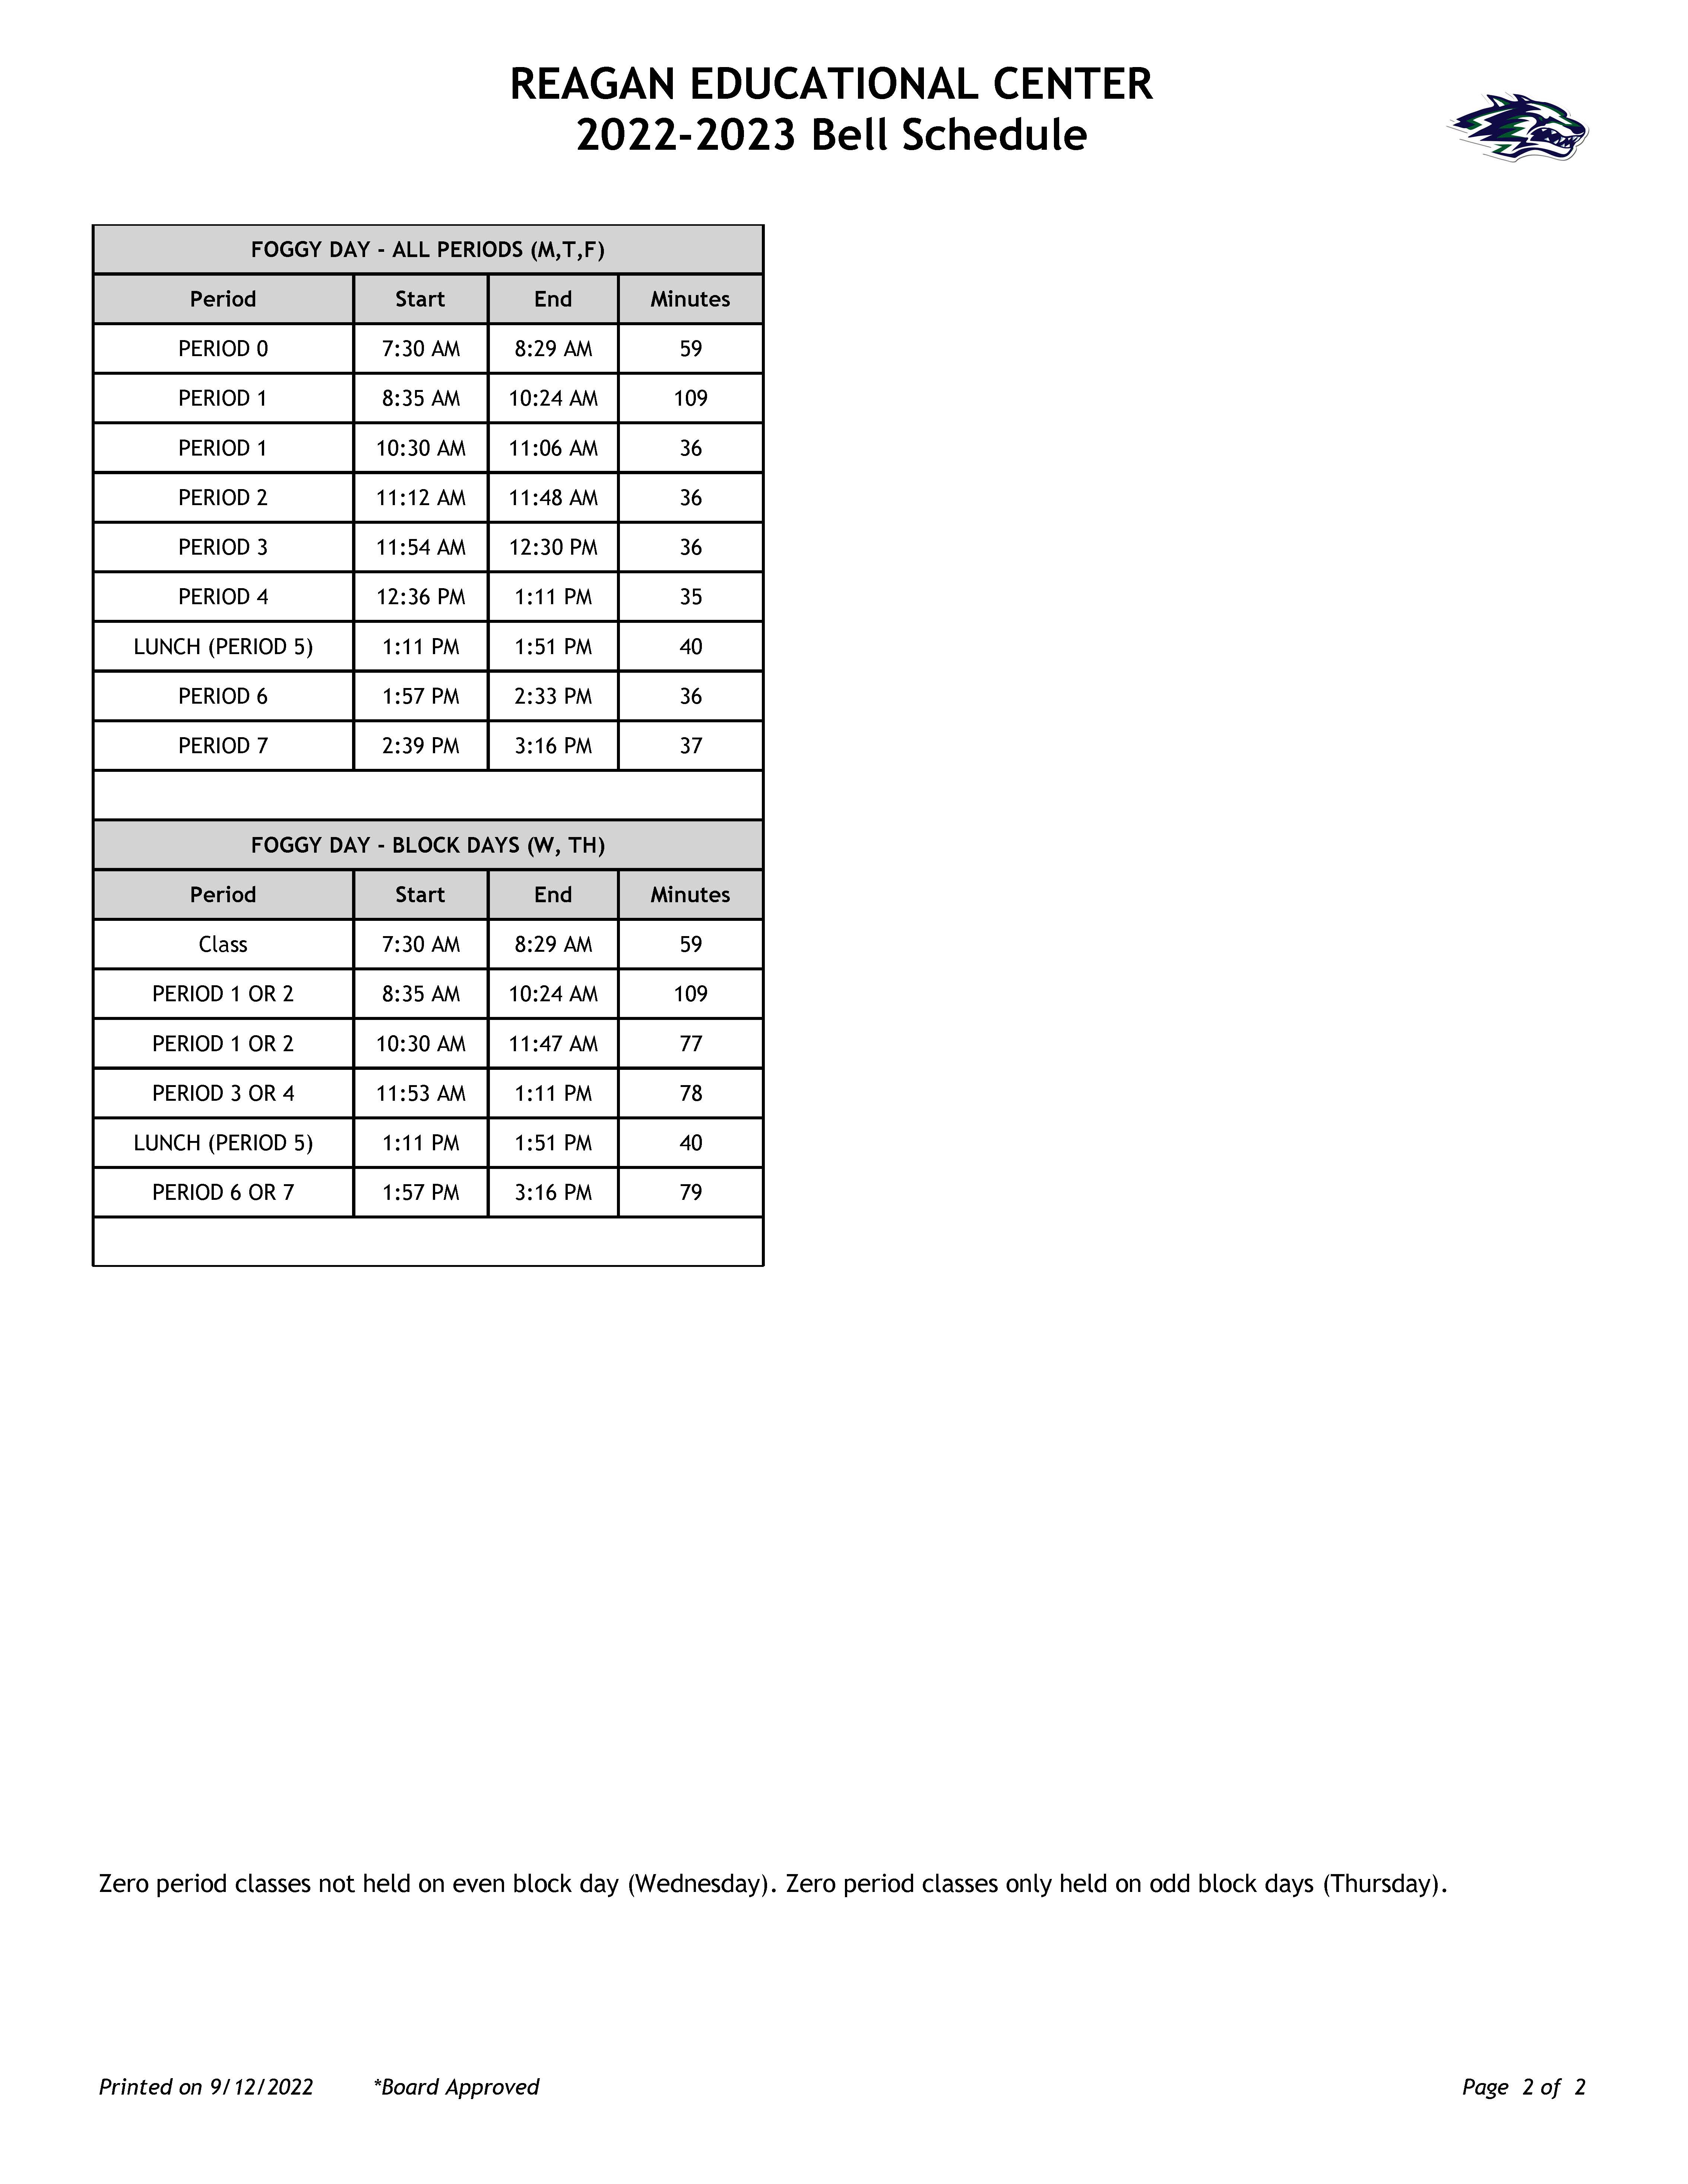 2022-2023 Bell Schedule with foggy day information